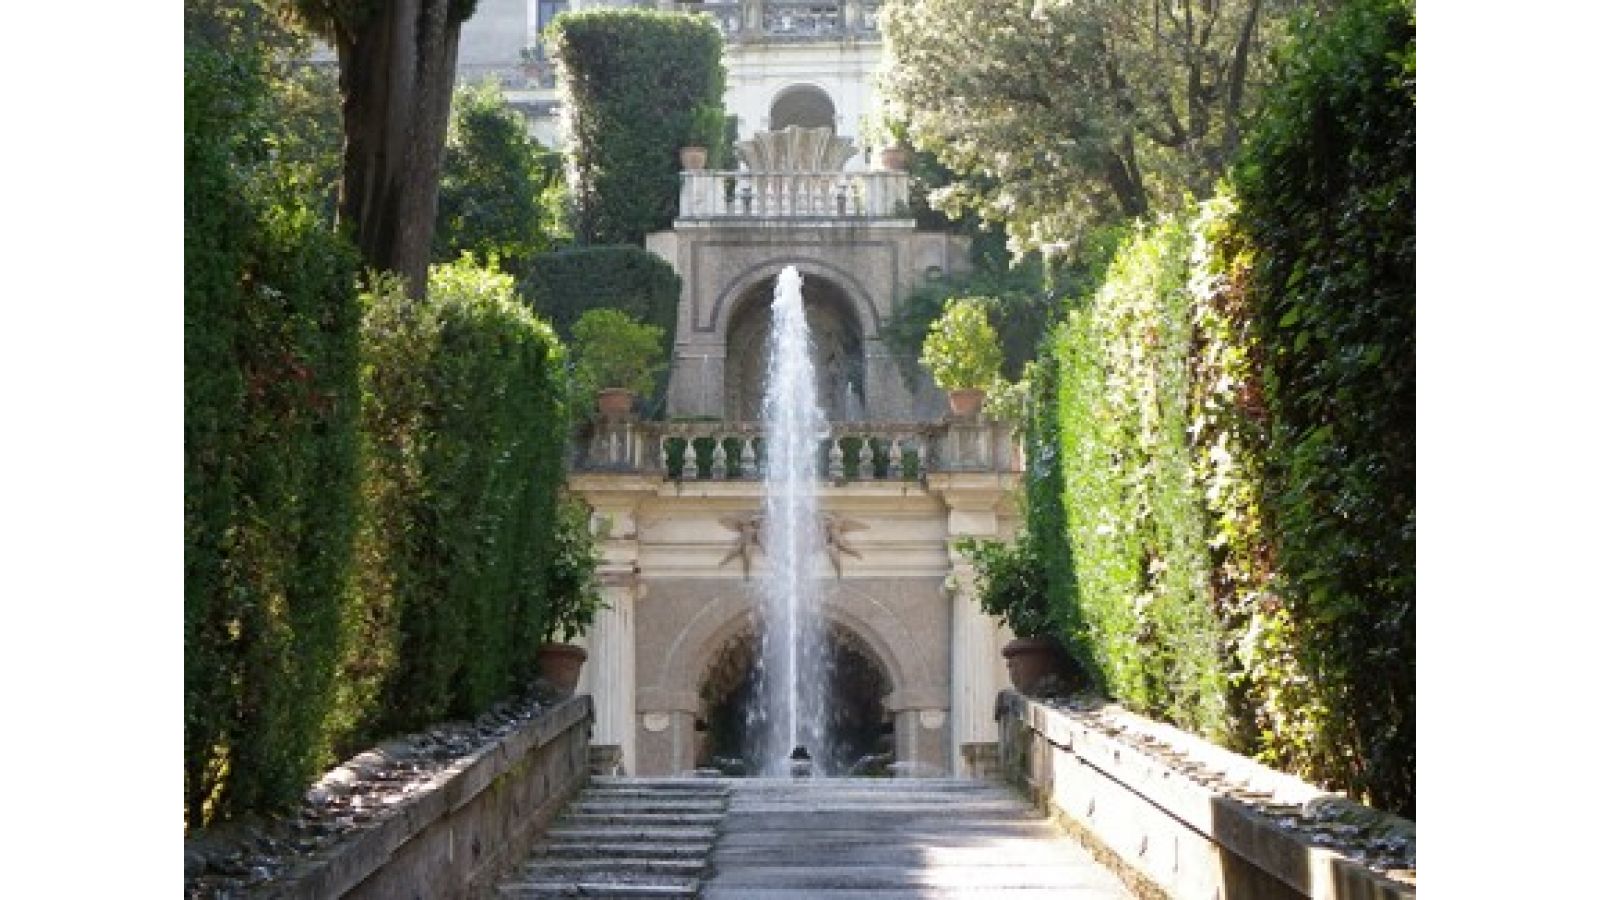 ANTIQUE FRENCH FOUNTAINS FROM PROVENCE 